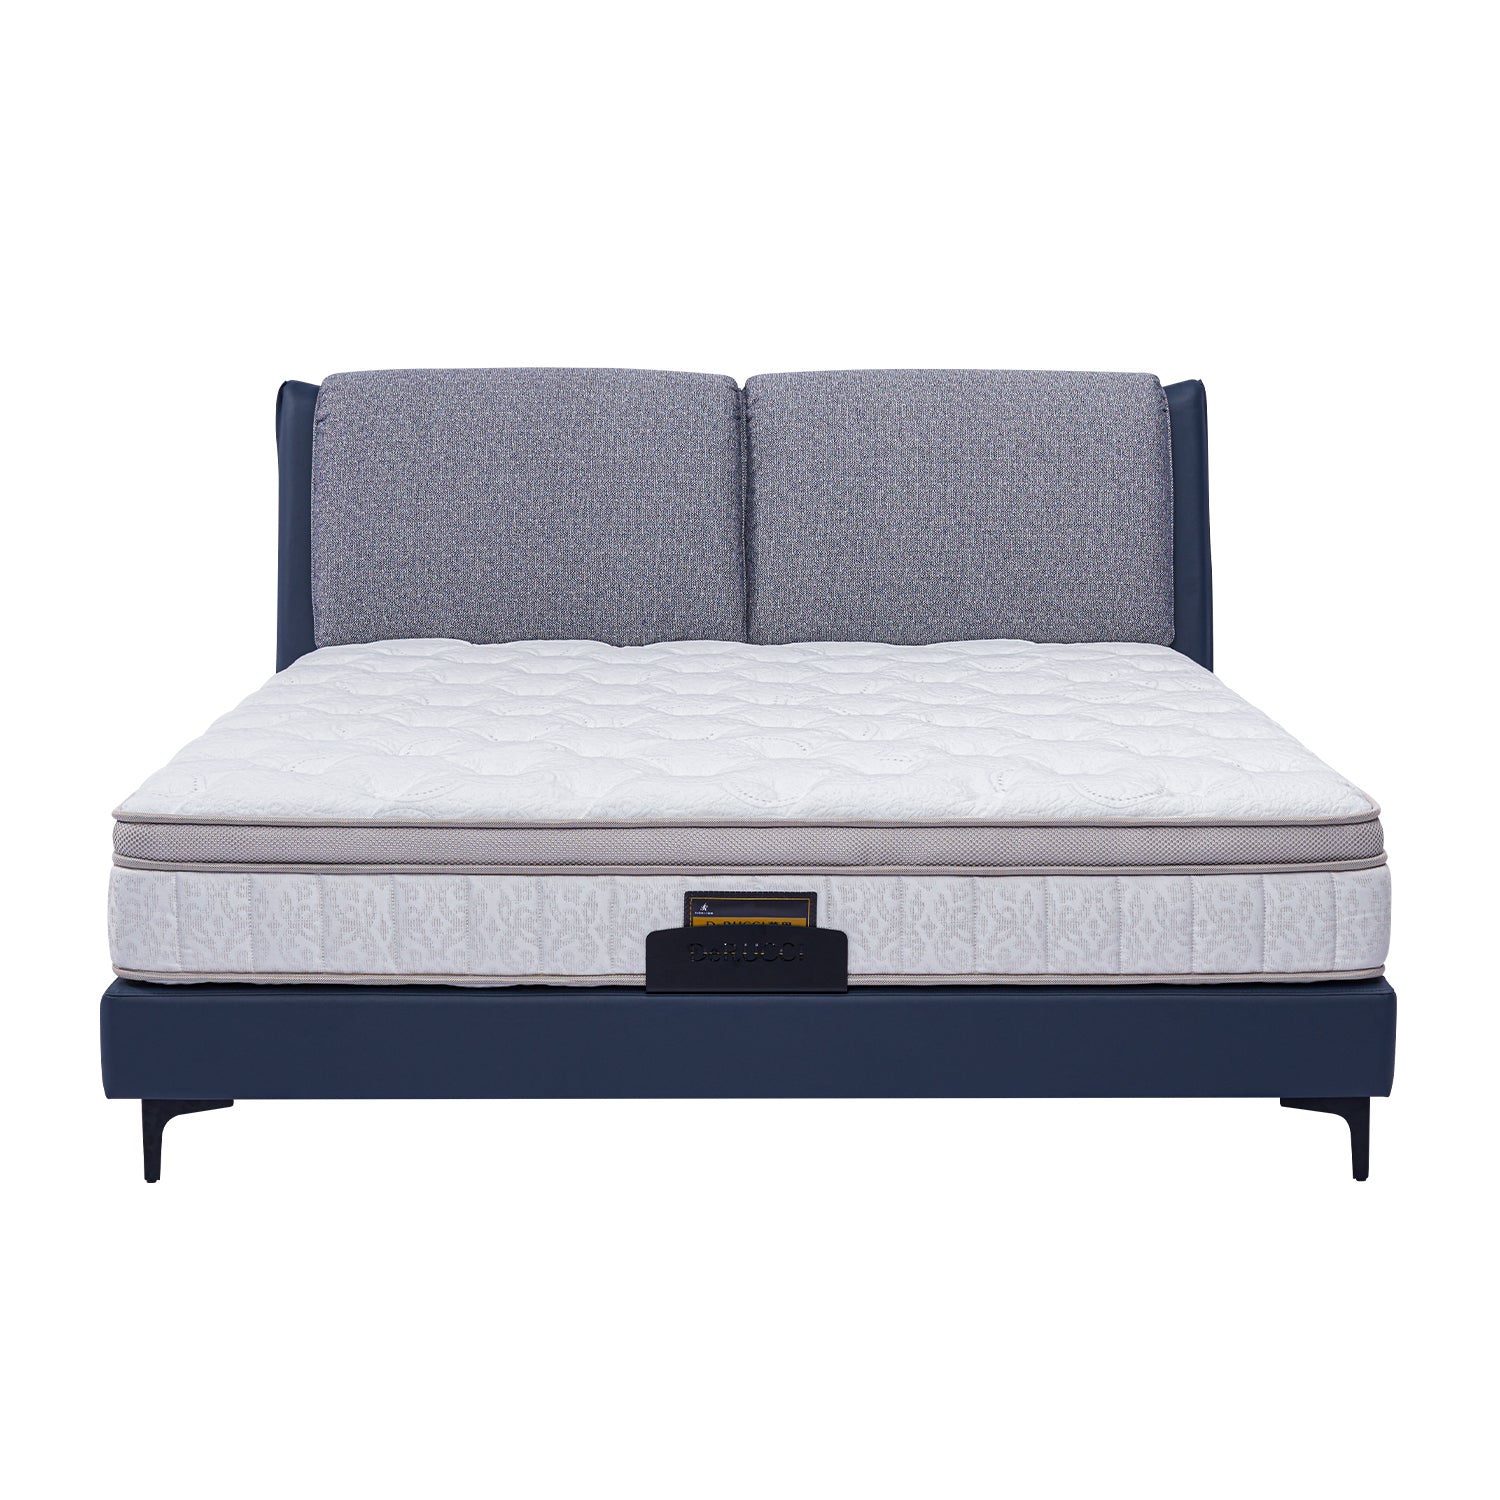 DeRUCCI BOC1-017 bed frame with white mattress, blue upholstered frame, and grey fabric cushion headboard